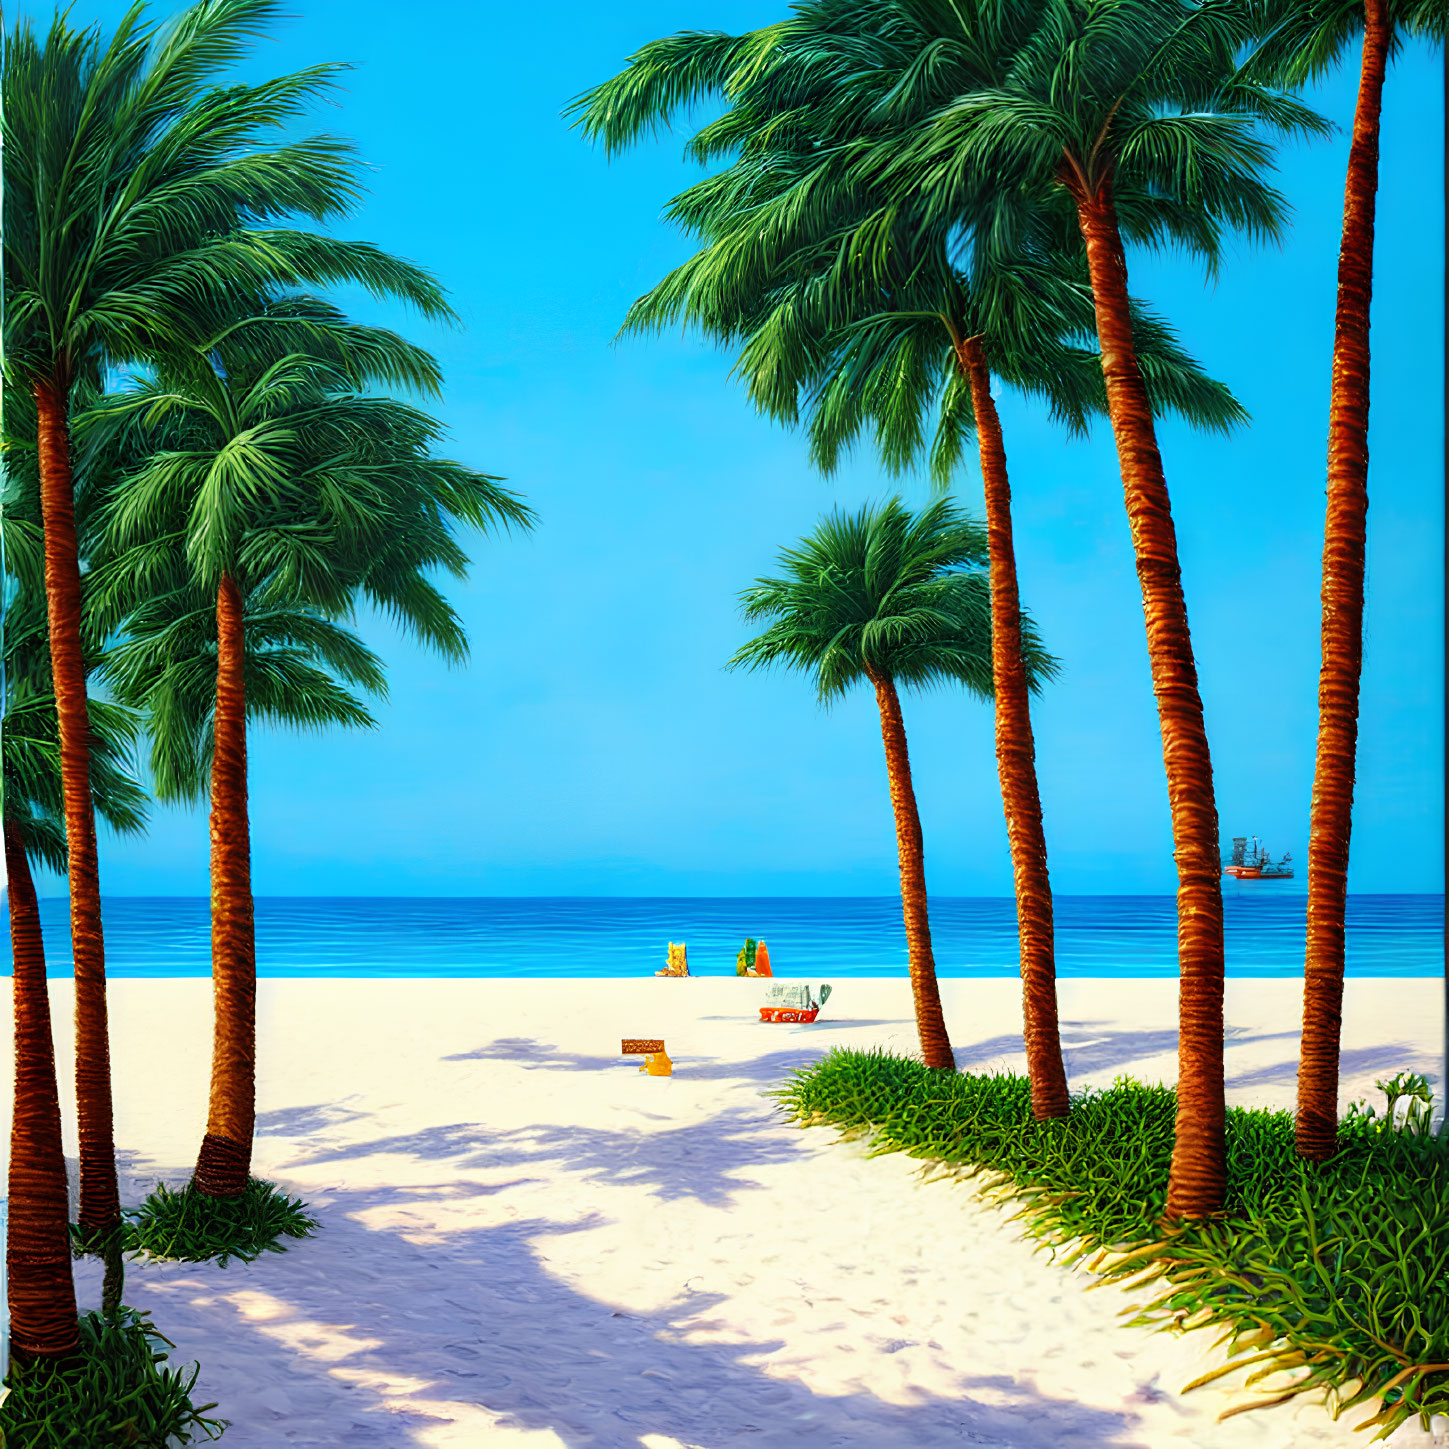 Tropical beach scene with palm trees, blue skies, white sand, and calm ocean